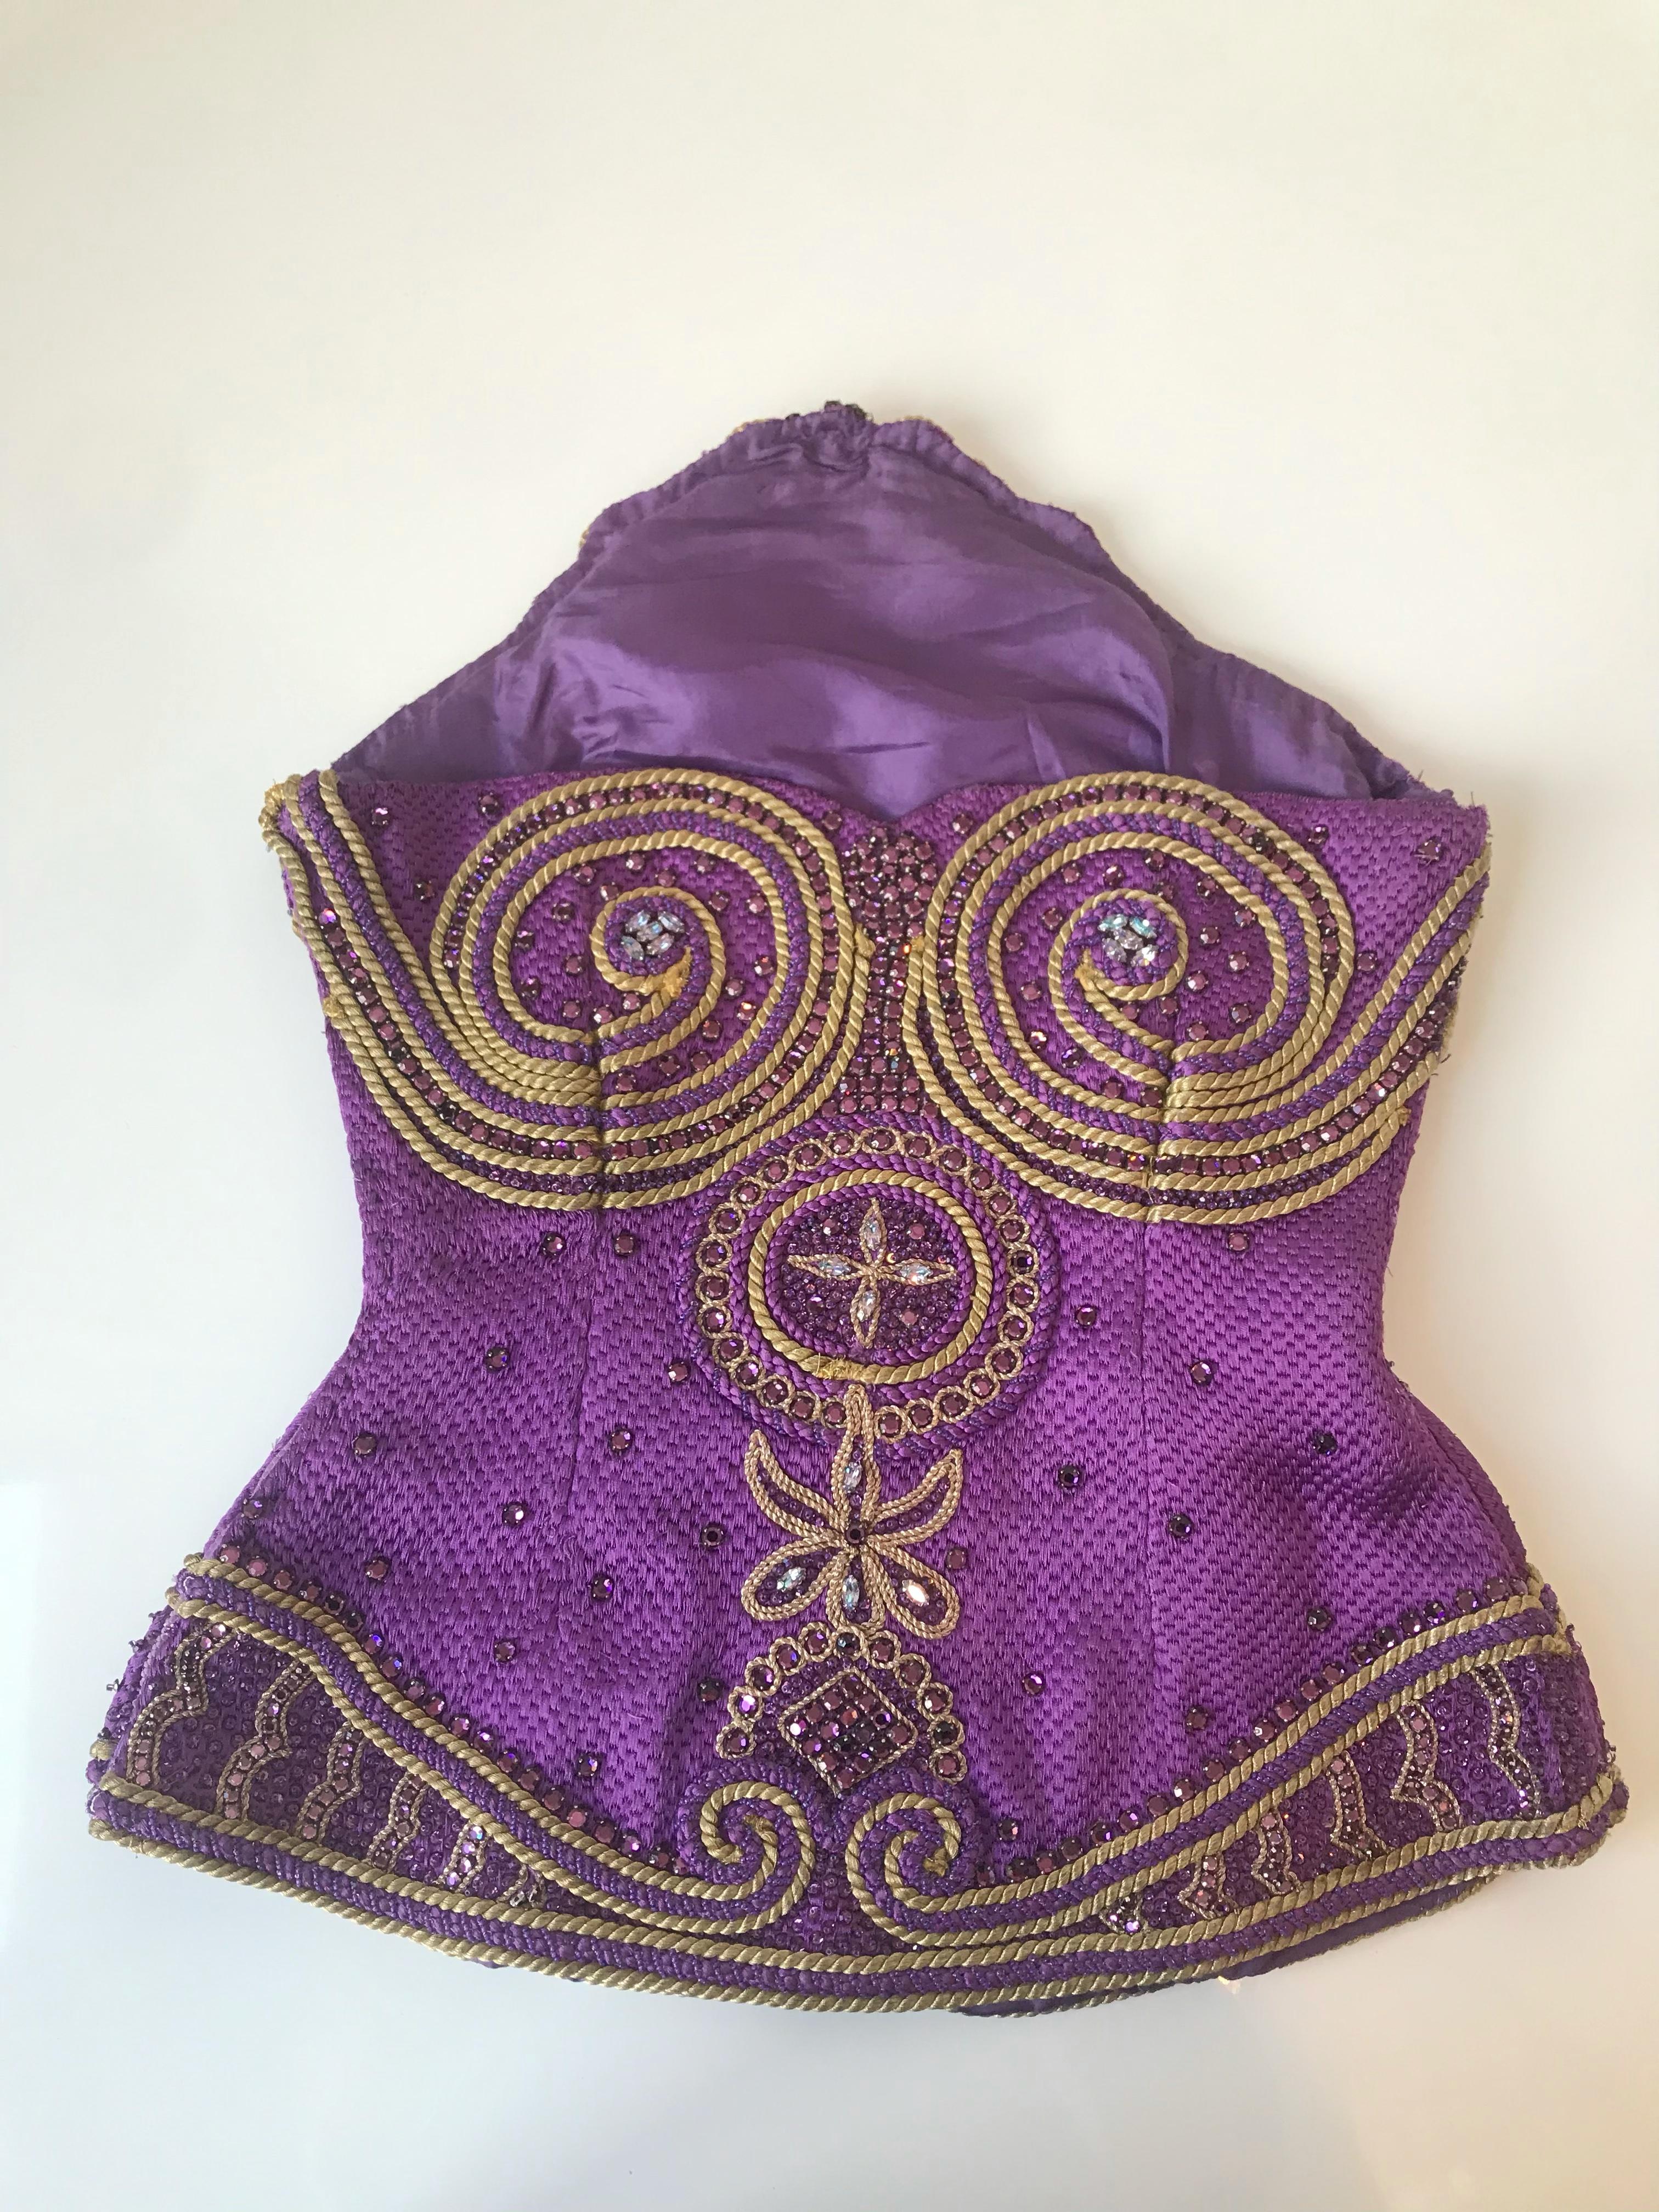 Gianni Versace Couture Purple & Gold Embellished & Embroidered Bustier/Corset For Sale 8